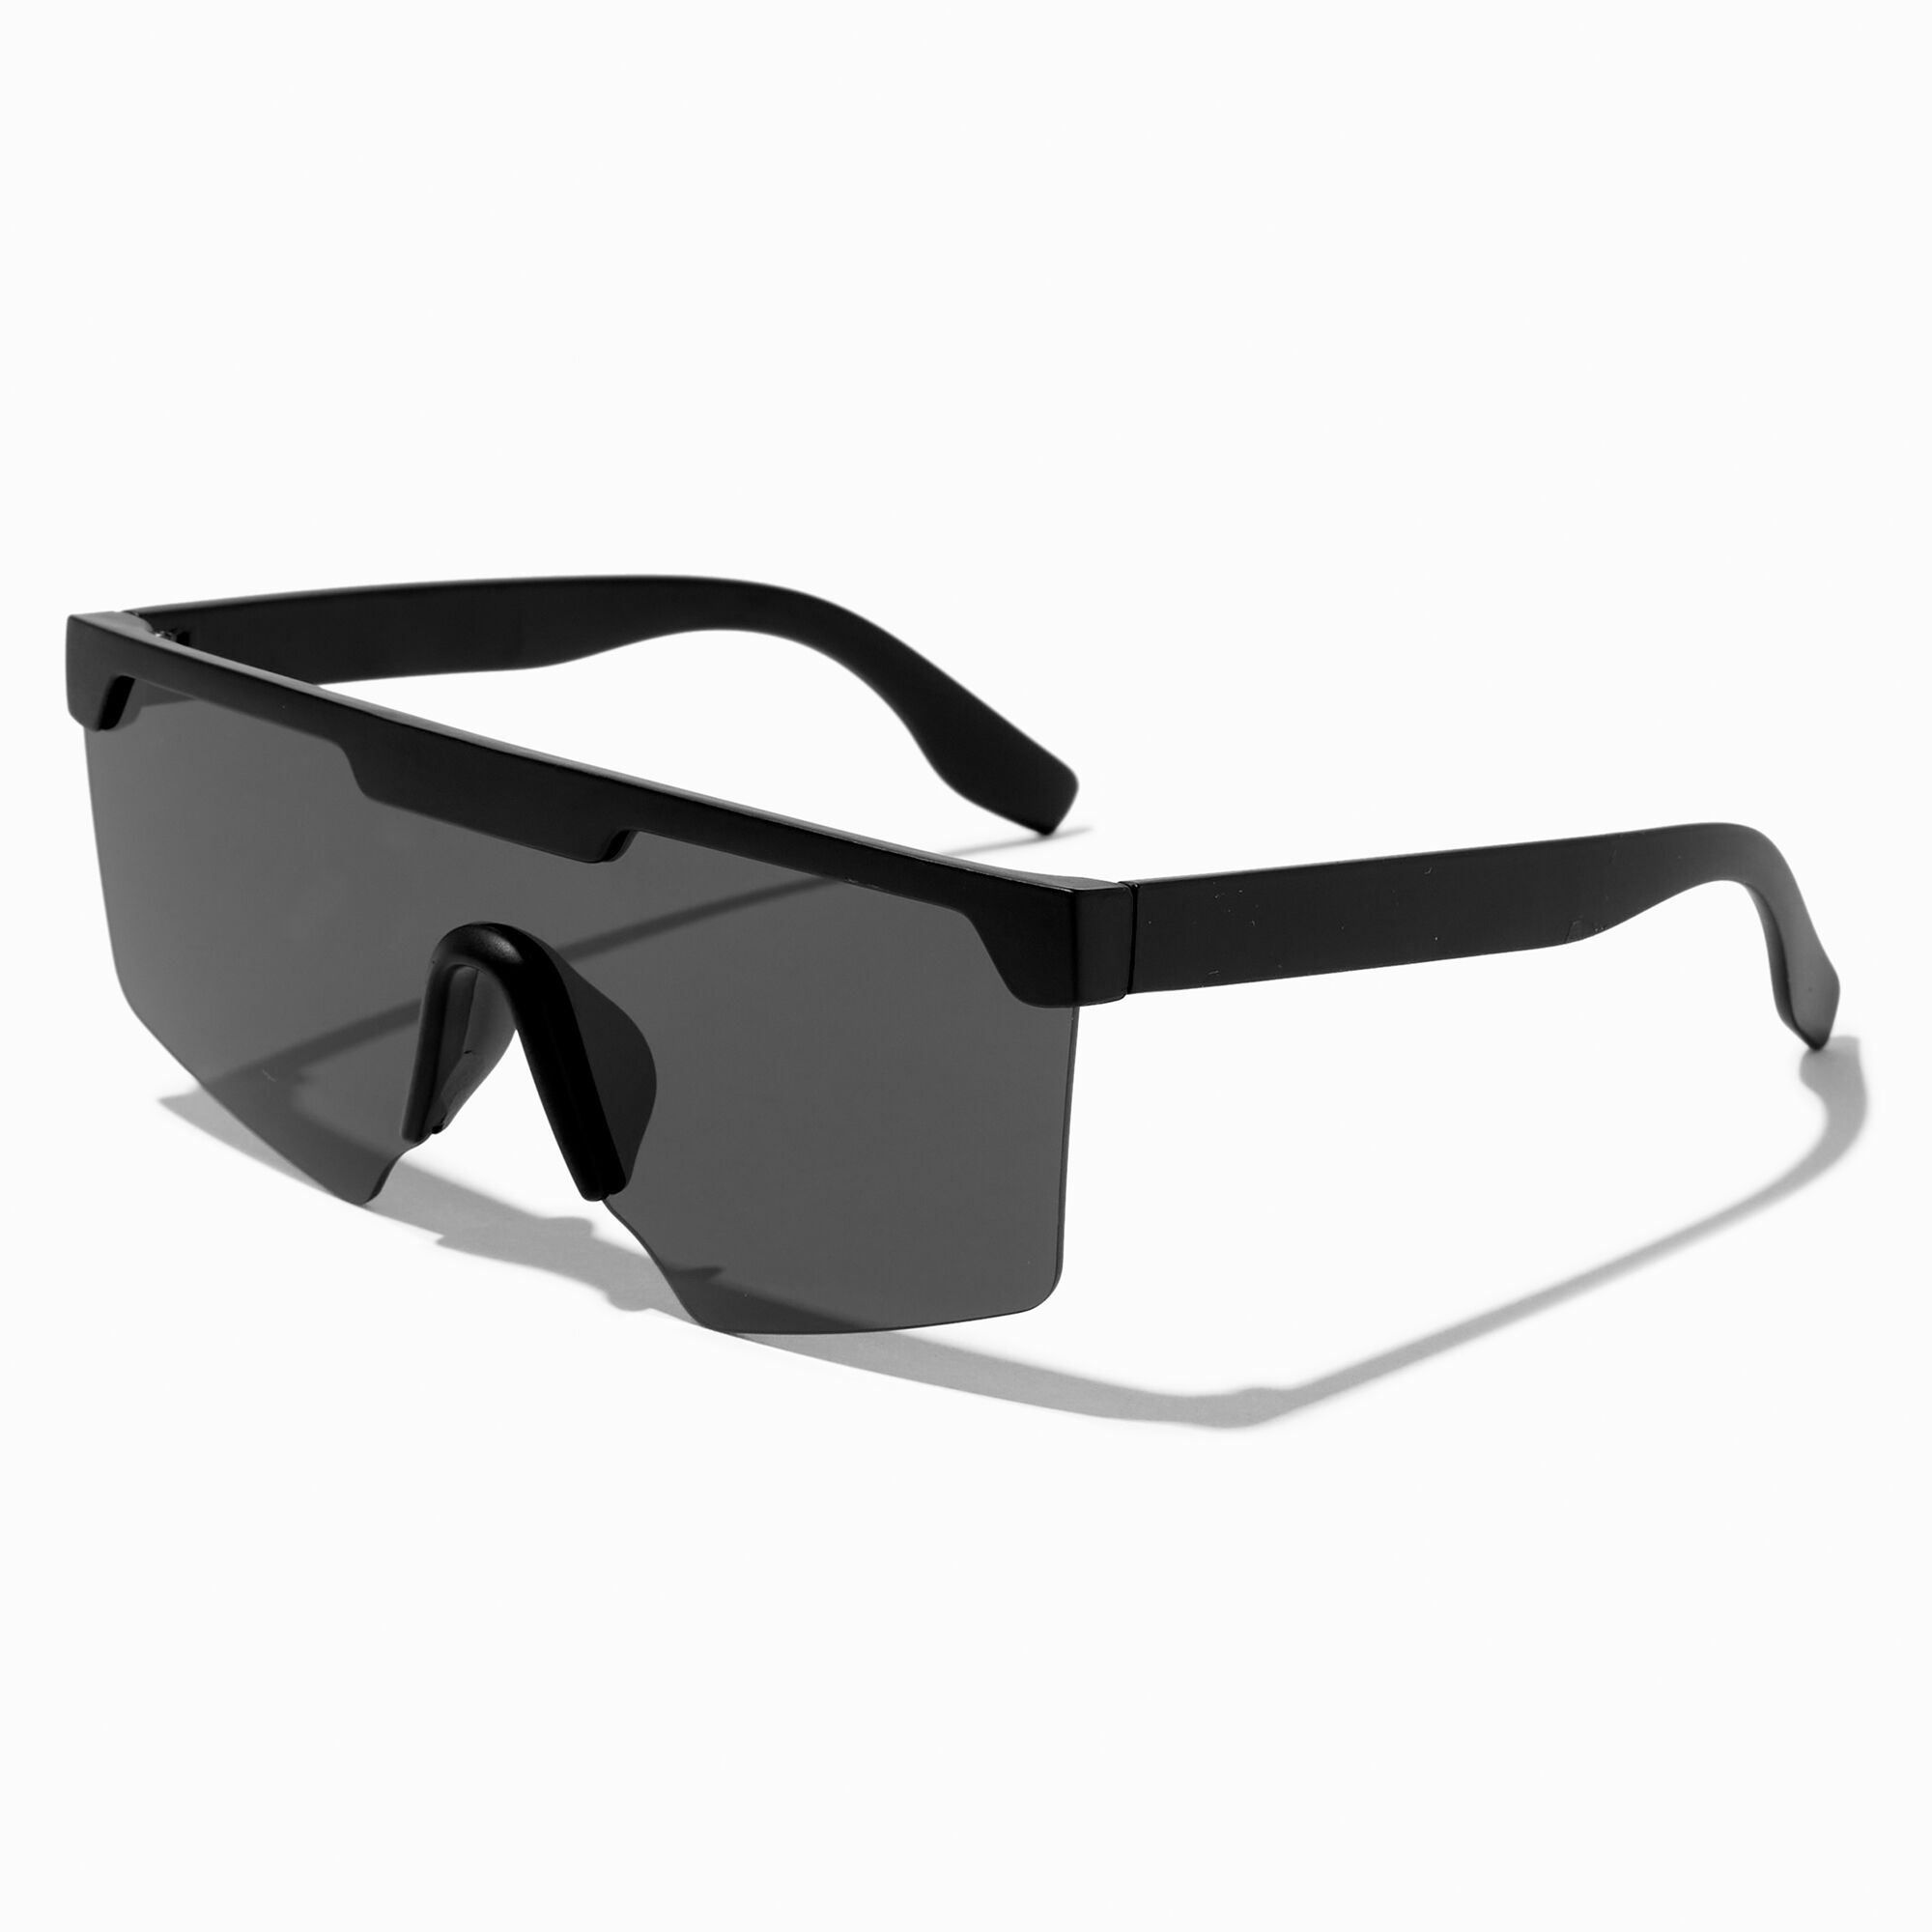 View Claires Solid Shield Sunglasses Black information